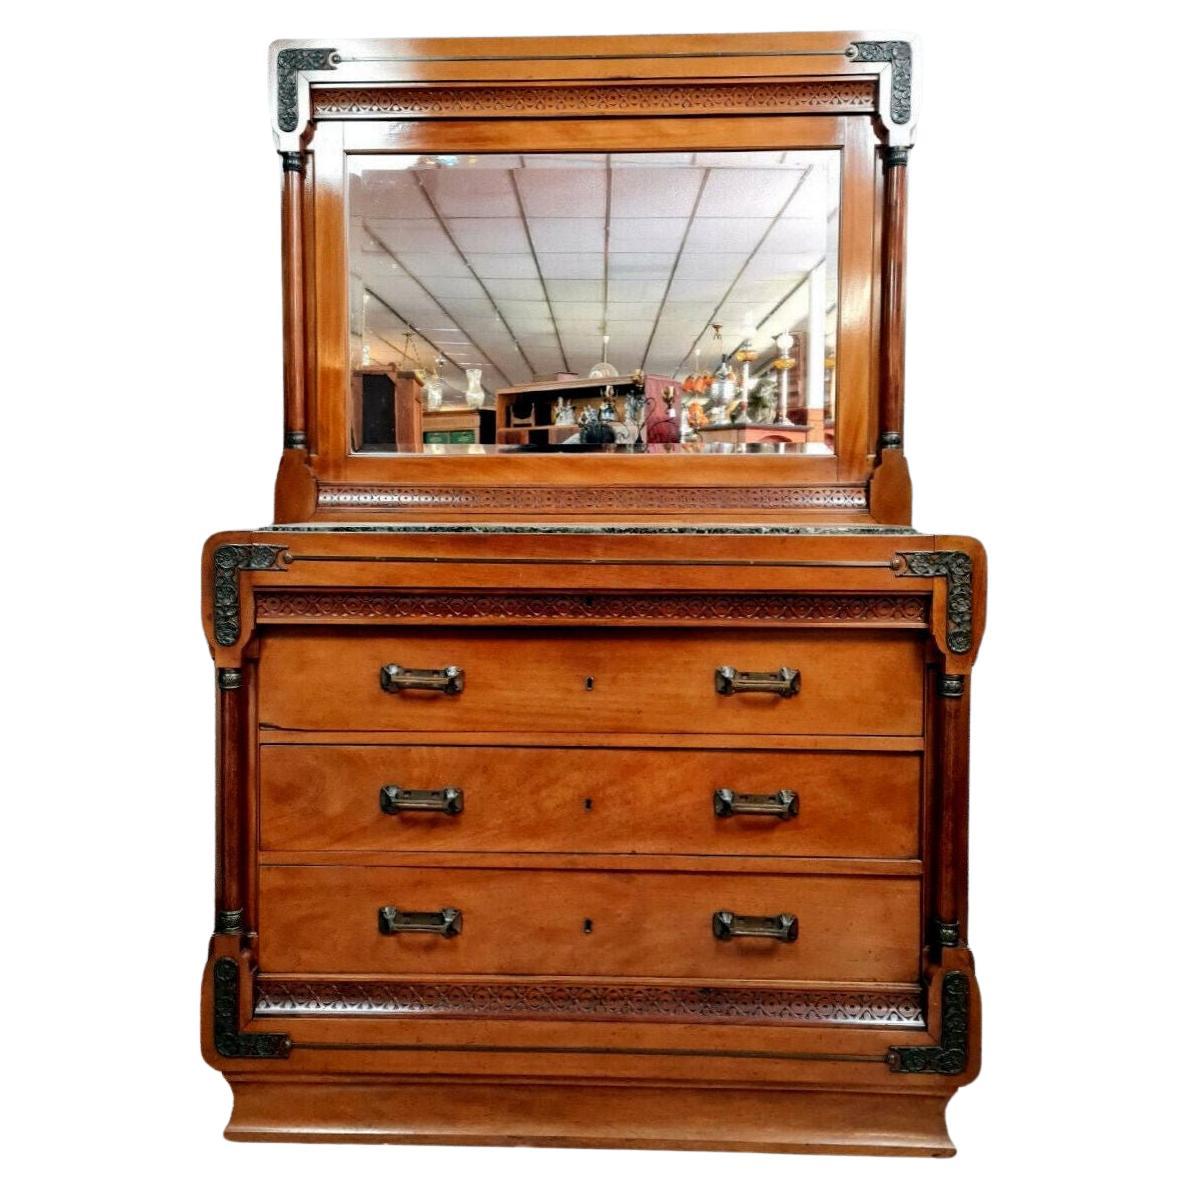 Museum-Quality Empire Mahogany Dressing Chest with Psyche Mirror -1X36